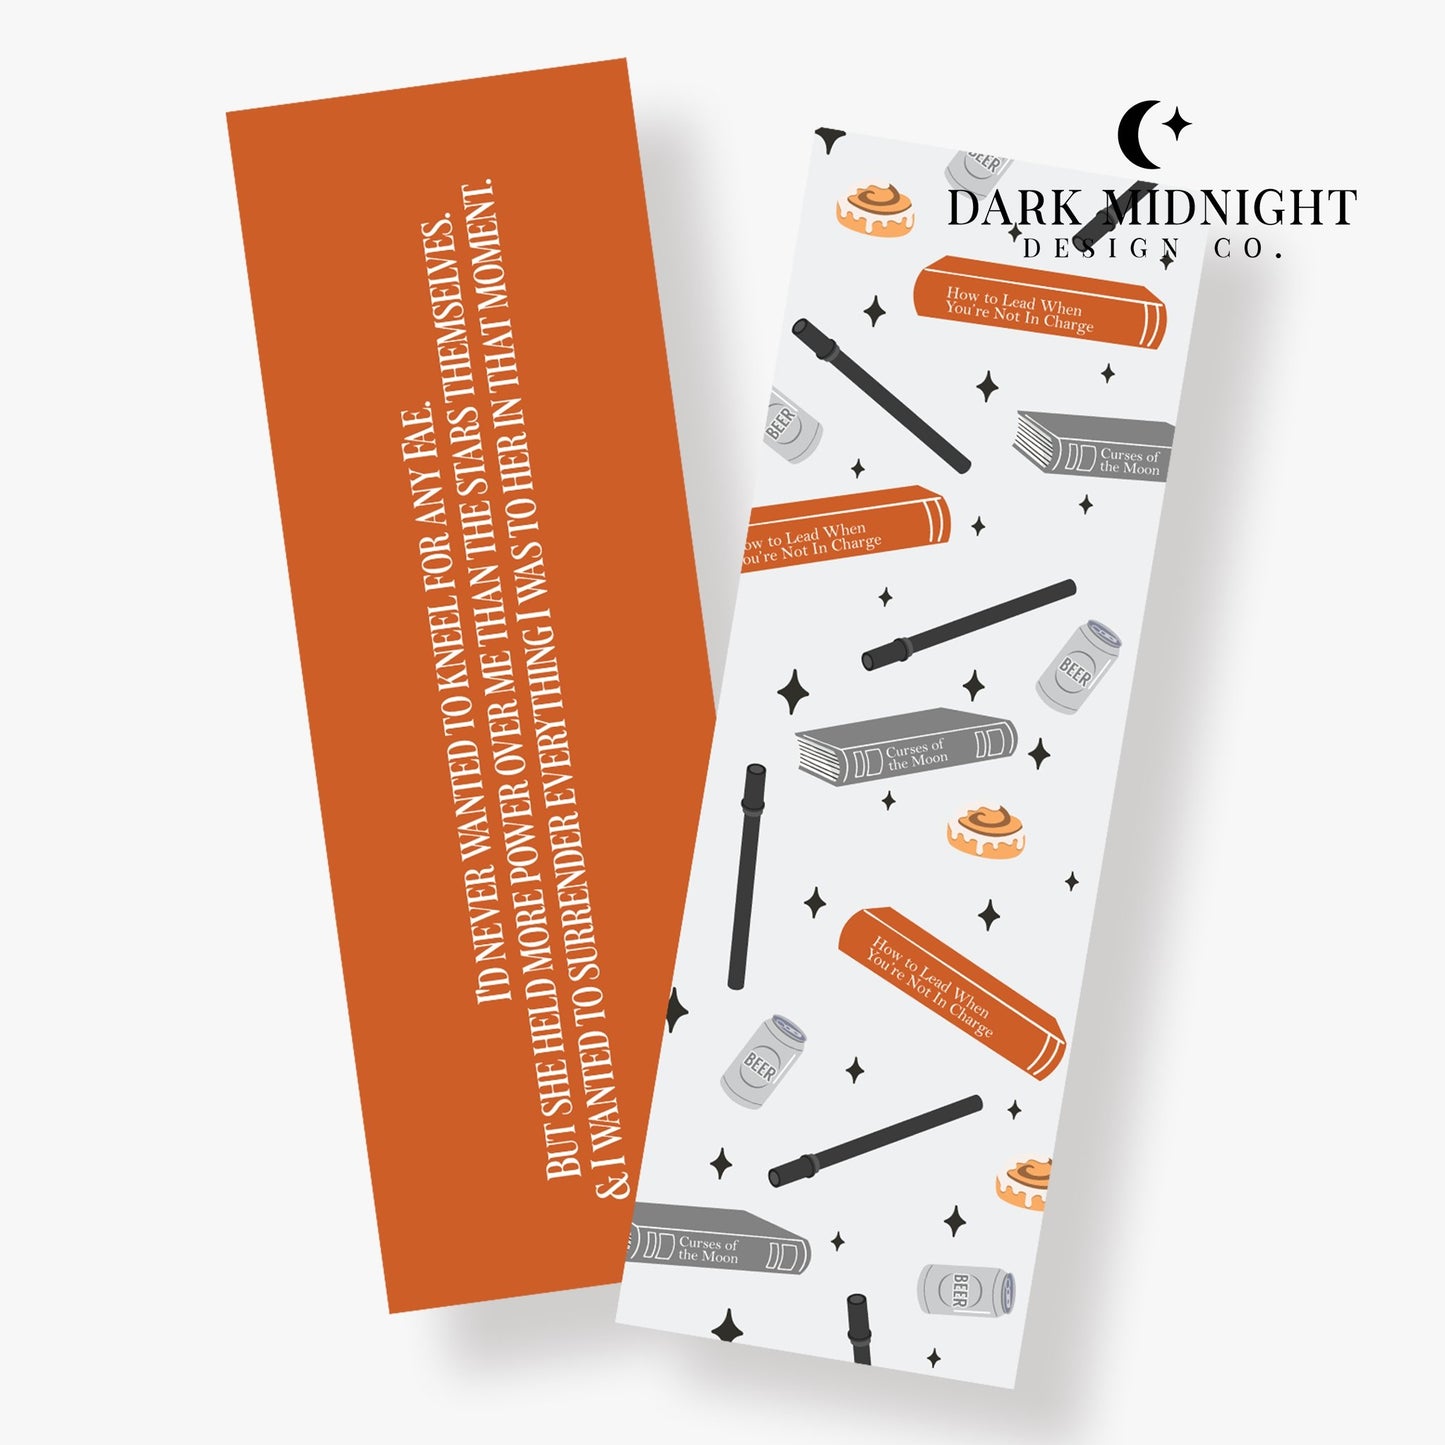 Character Anthology Bookmark - Mason Cain - Officially Licensed Darkmore Penitentiary Bookmark - Dark Midnight Design Co